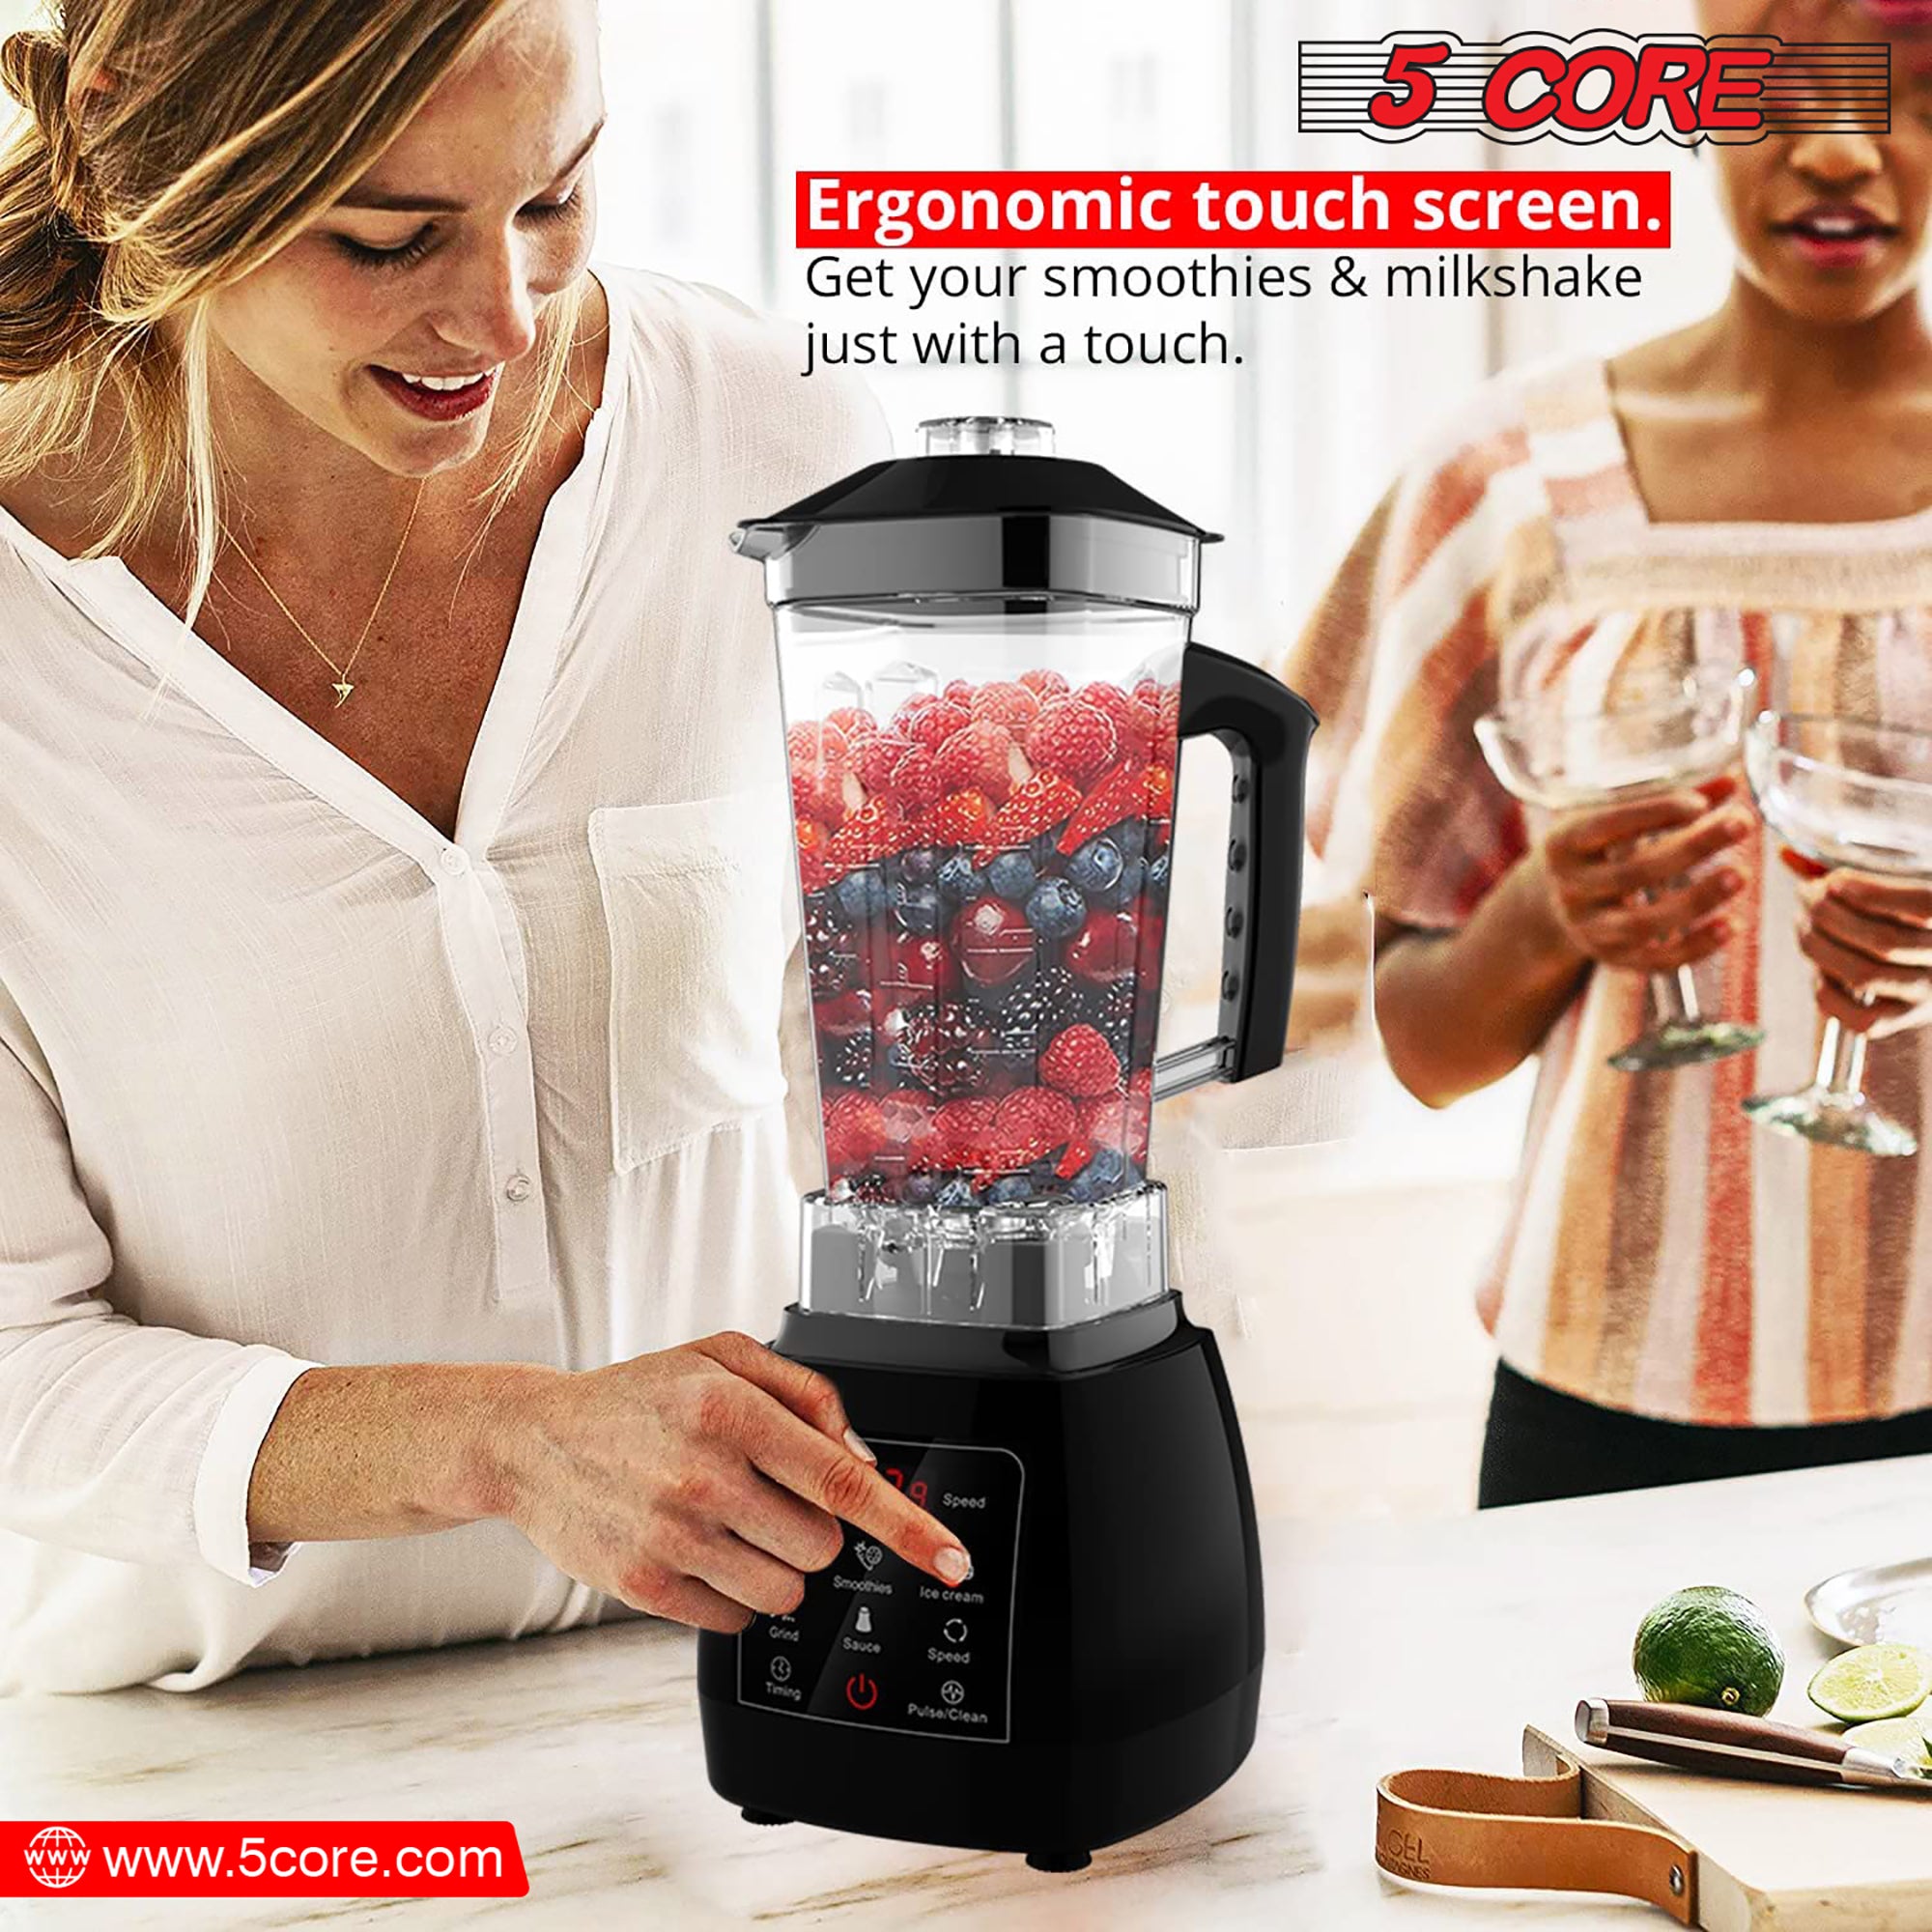 Blender for Shakes and Smoothies Buy Online- 5 Core  Smoothie blender, Smoothie  shakes, Food processor recipes